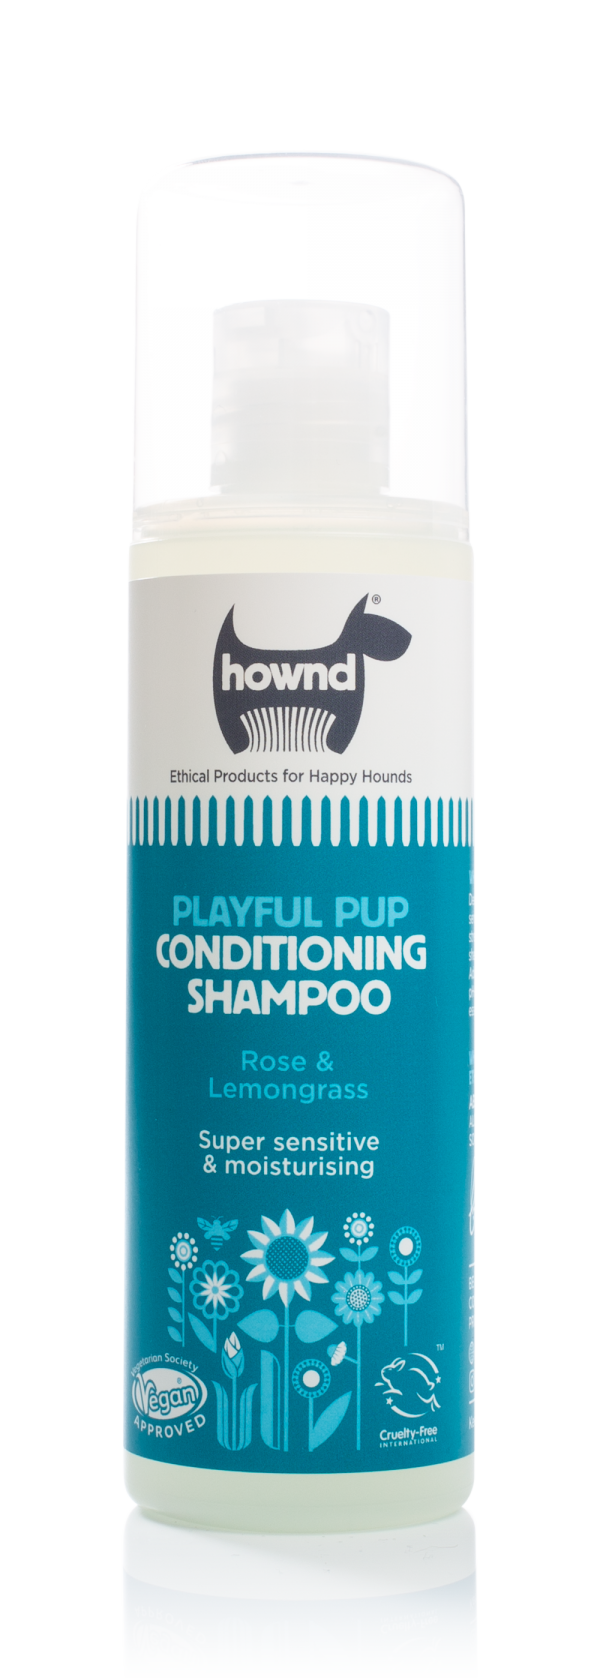 Playful Pup Conditioning Shampoo